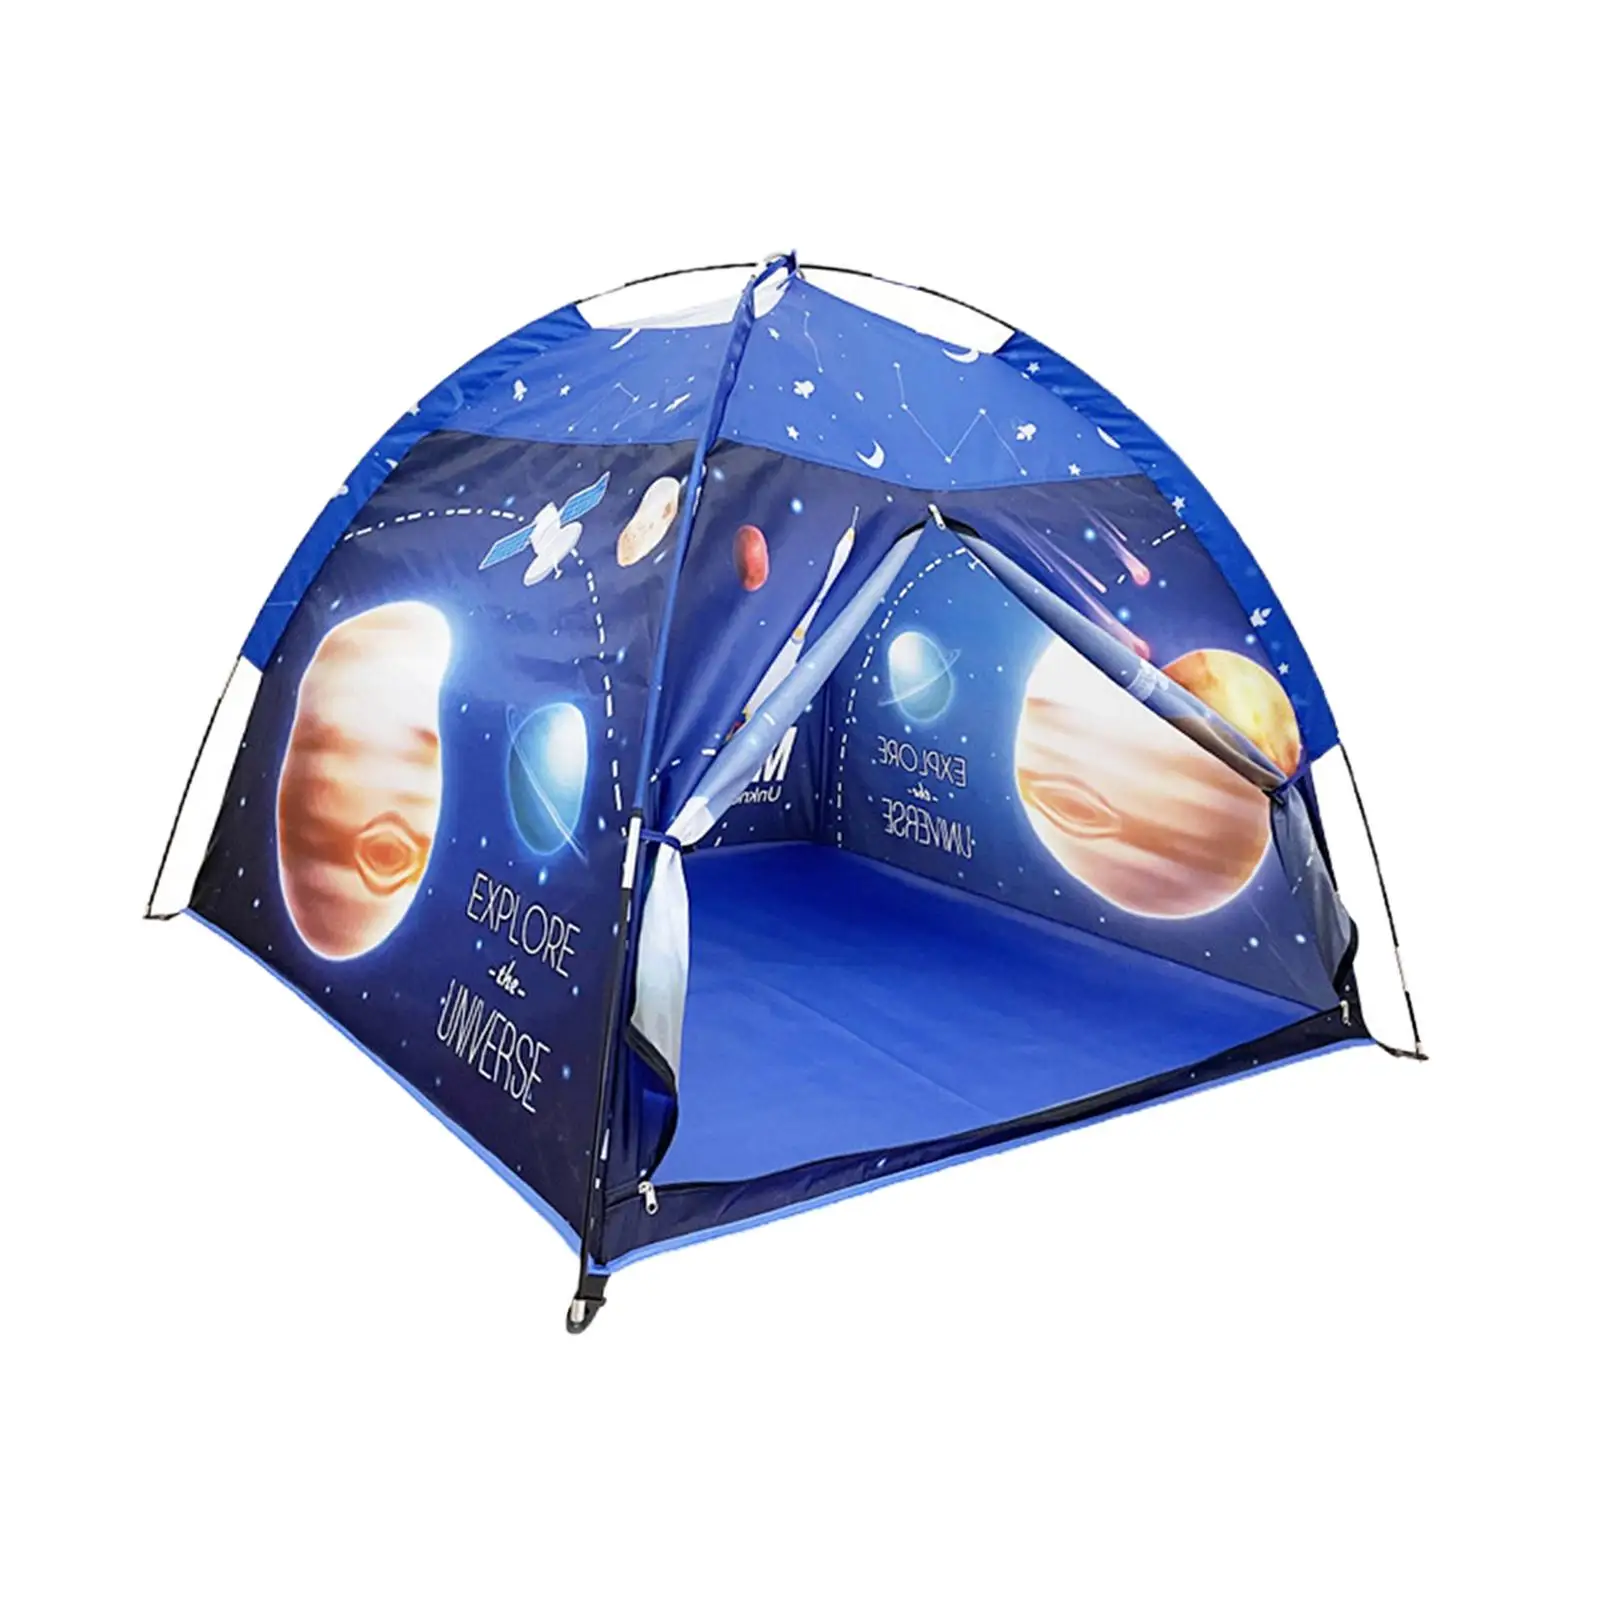 Play Tent Camping Playground Foldable Child Room Decor Indoor and Outdoor Play Tent for Boys Kids Toddlers Children Girls